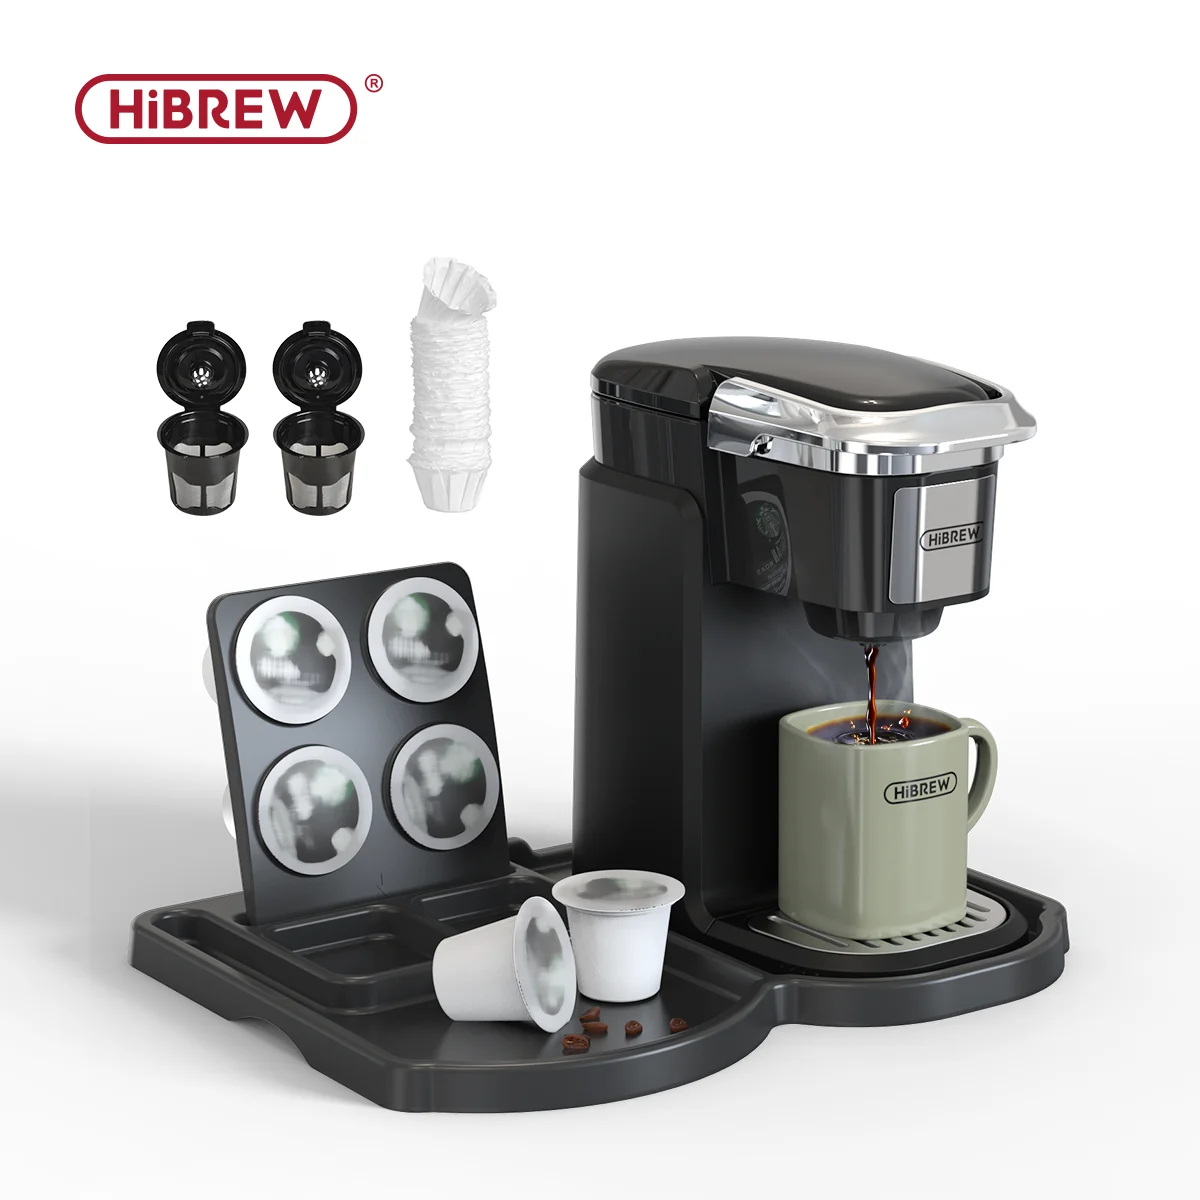 https://ae01.alicdn.com/kf/S4d5d21120a4f48f1b1154386a947ee5bC/HiBREW-Filter-Coffee-Machine-Brewer-for-K-Cup-capsule-Ground-Coffee-tea-maker-hot-water-dispenser.png